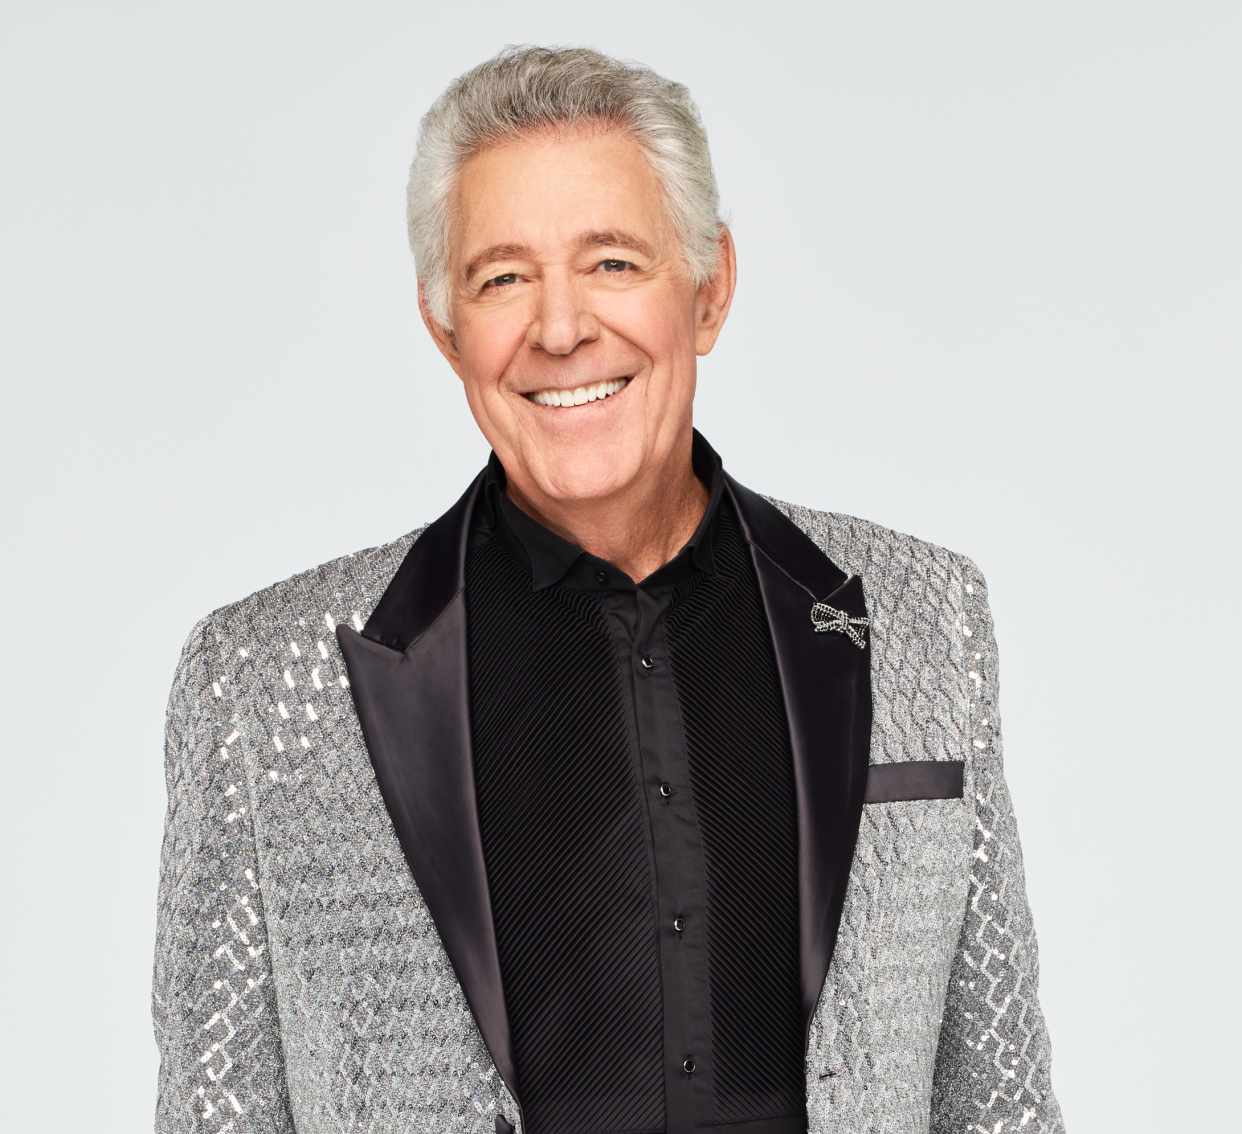 The (sequined) jacket fits. "Brady Bunch" star Barry Williams is on "Dancing With the Stars."